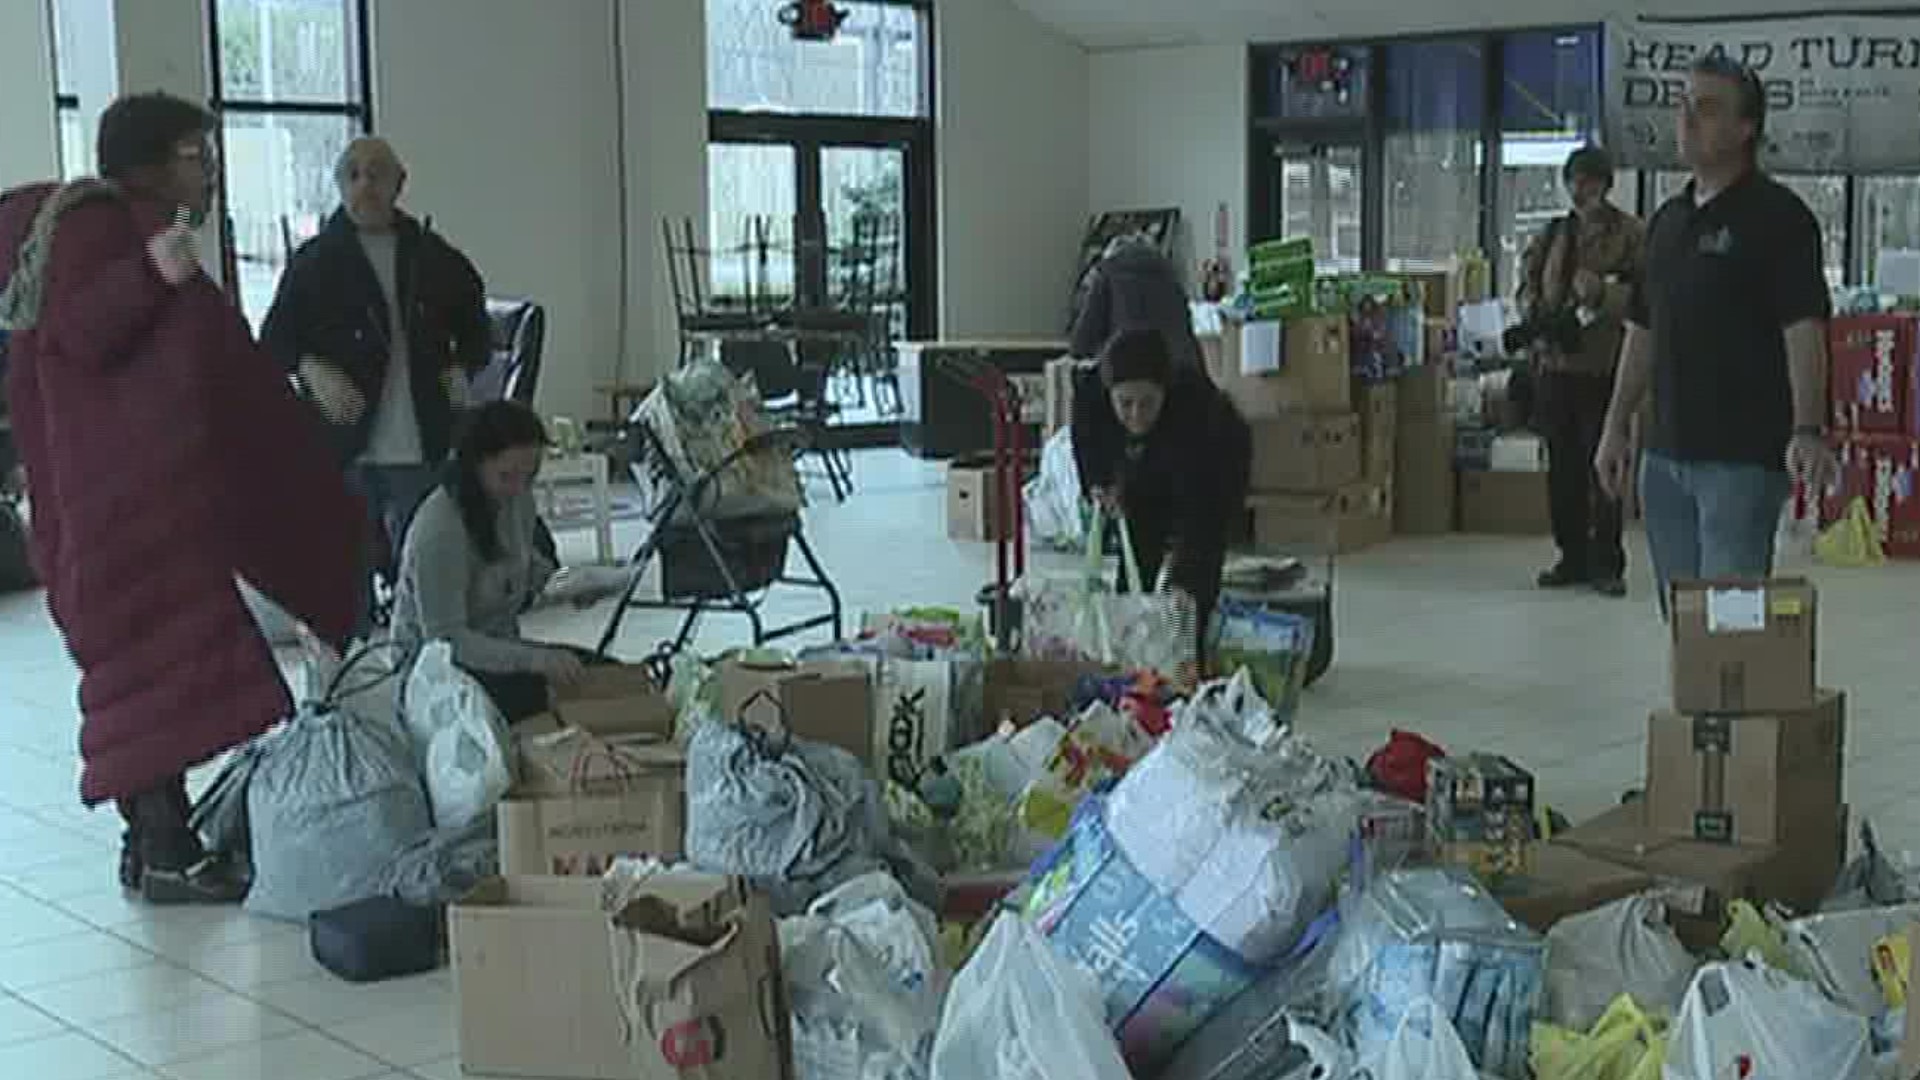 Volunteers in Luzerne County are getting ready to ship some much-needed supplies to Ukraine.